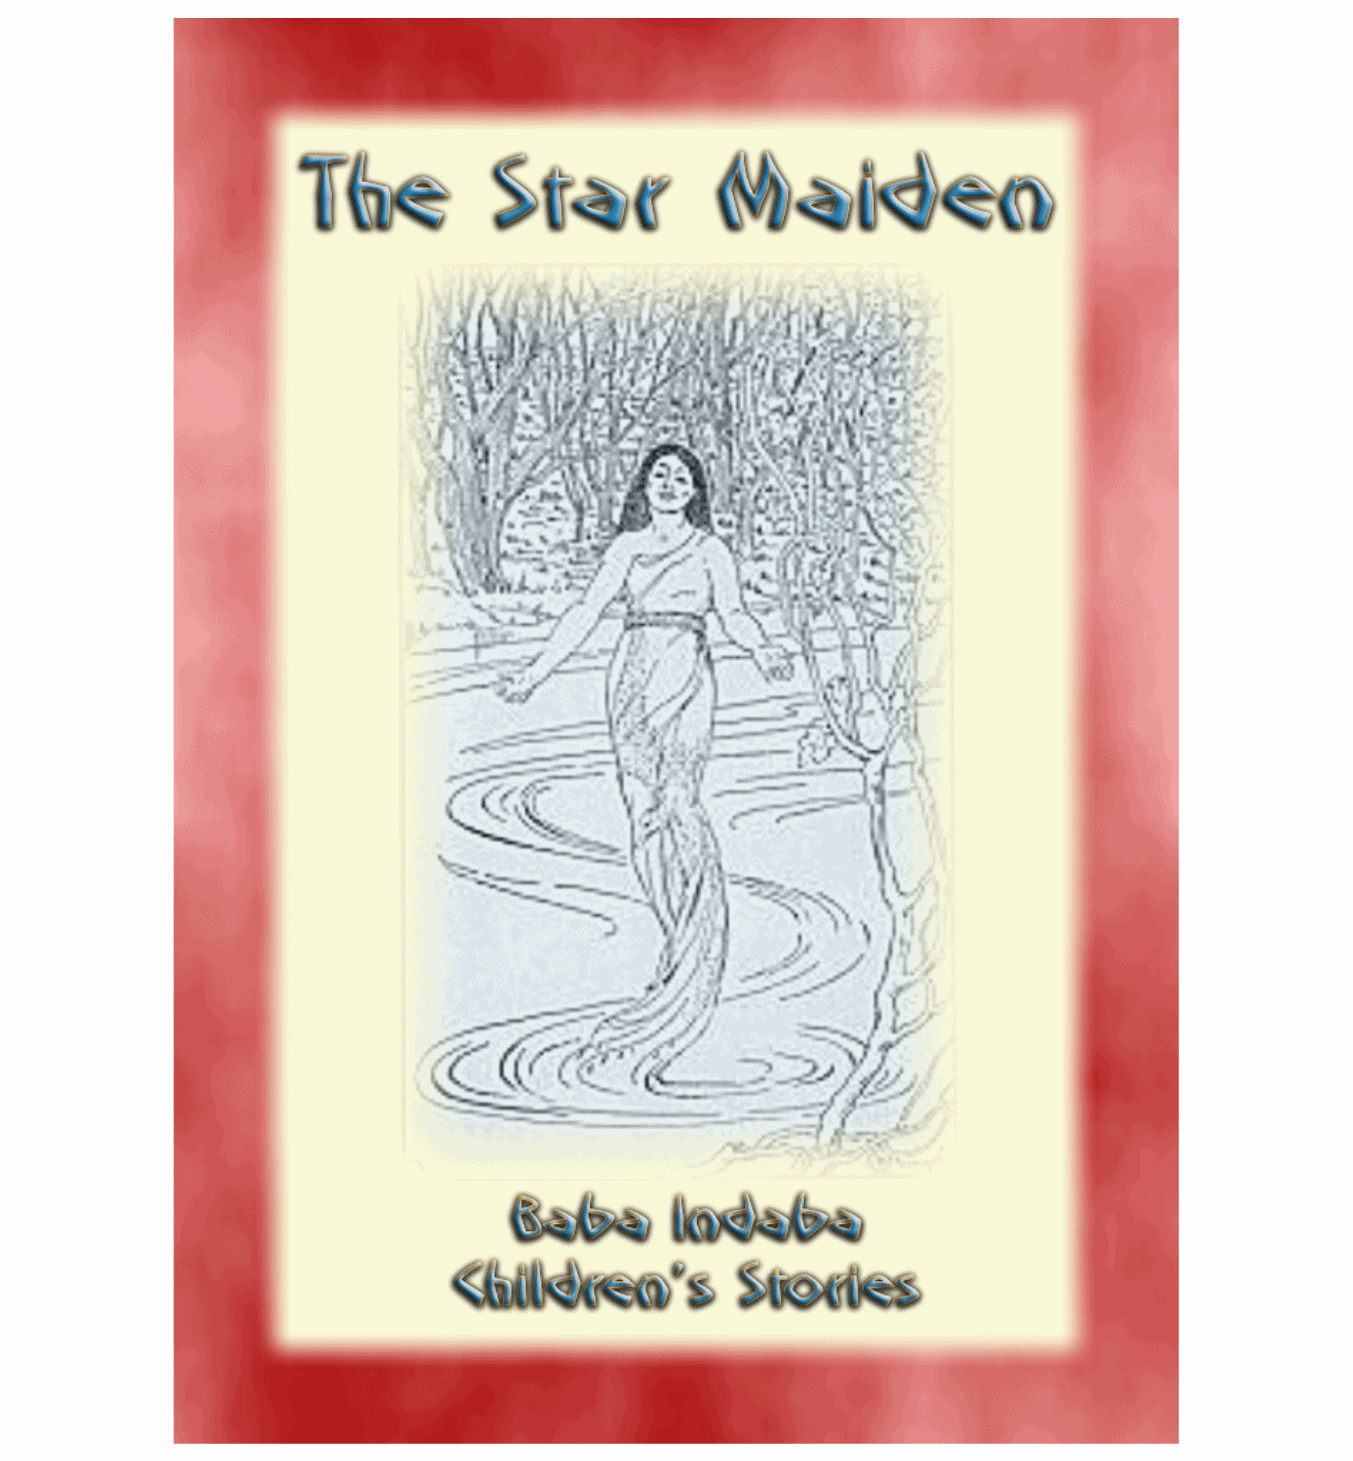 THE STAR MAIDEN - A Native American Ojibway Tale: Baba Indaba Children's Stories - Issue 018 